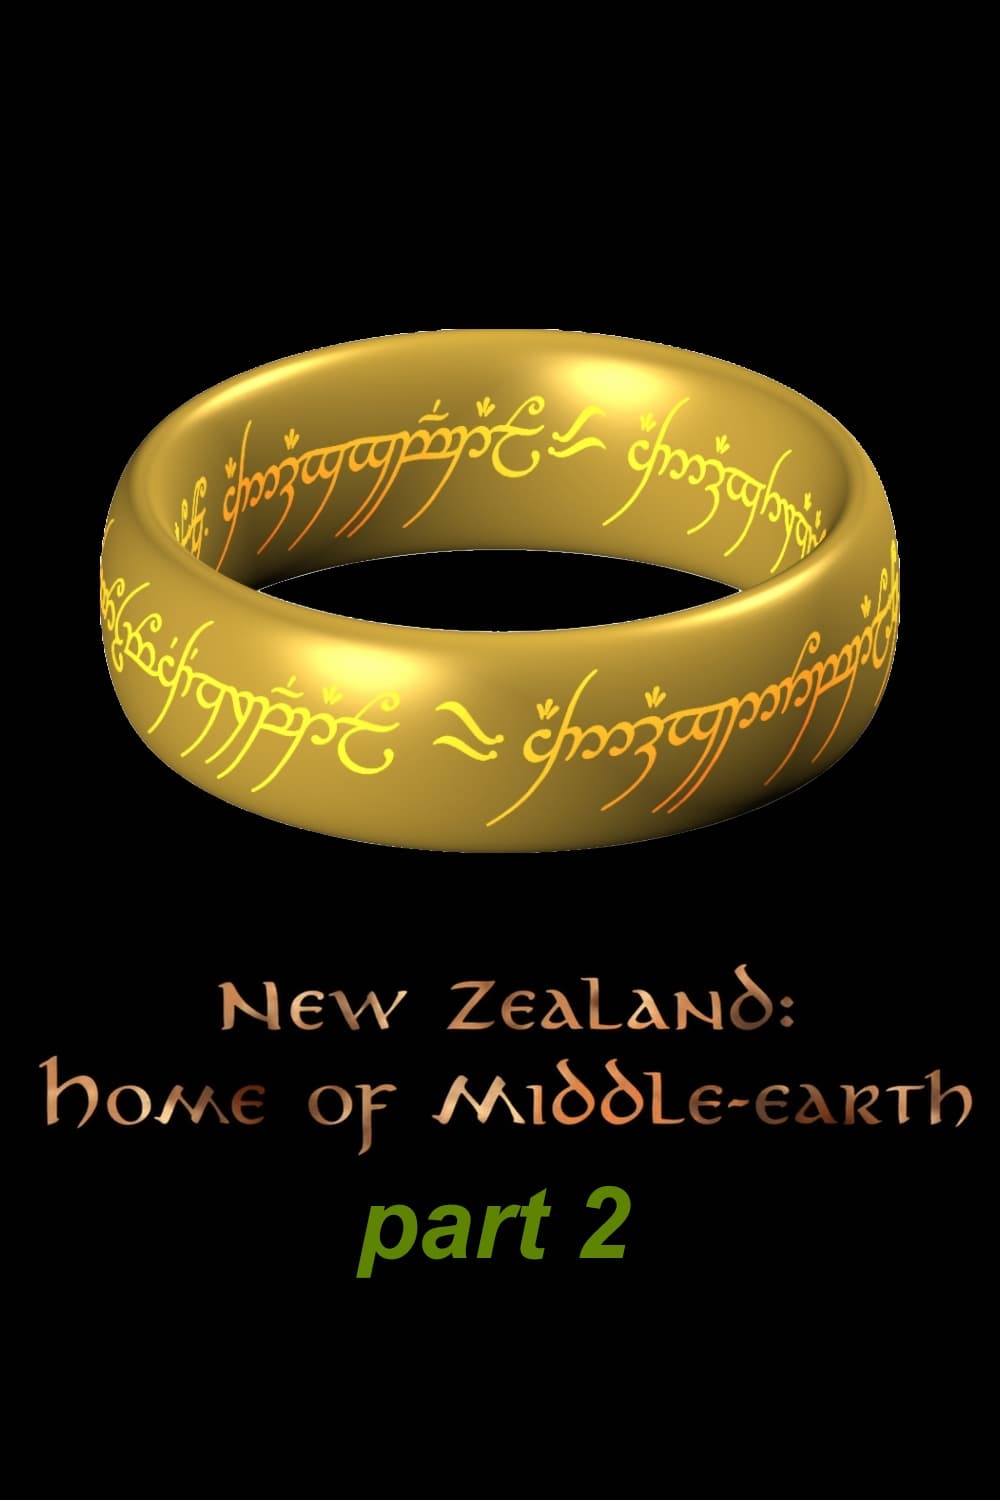 New Zealand - Home of Middle-earth - Part 2